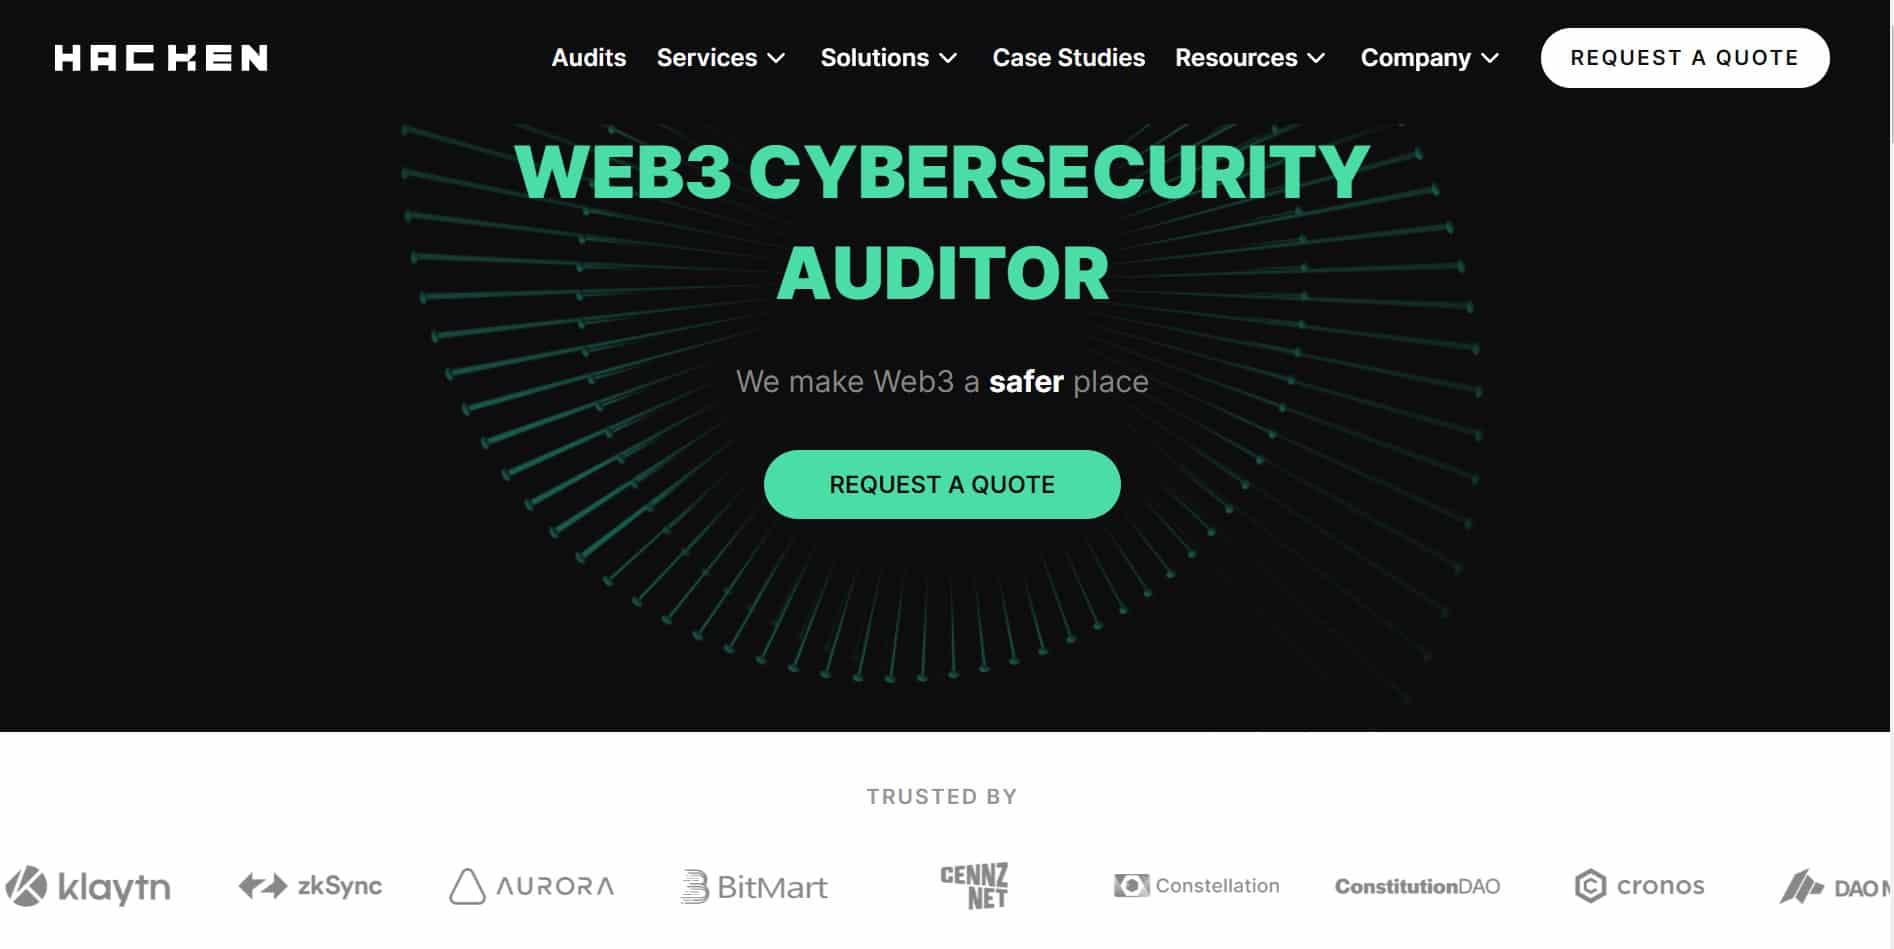 Hacken is a smart contract audit company